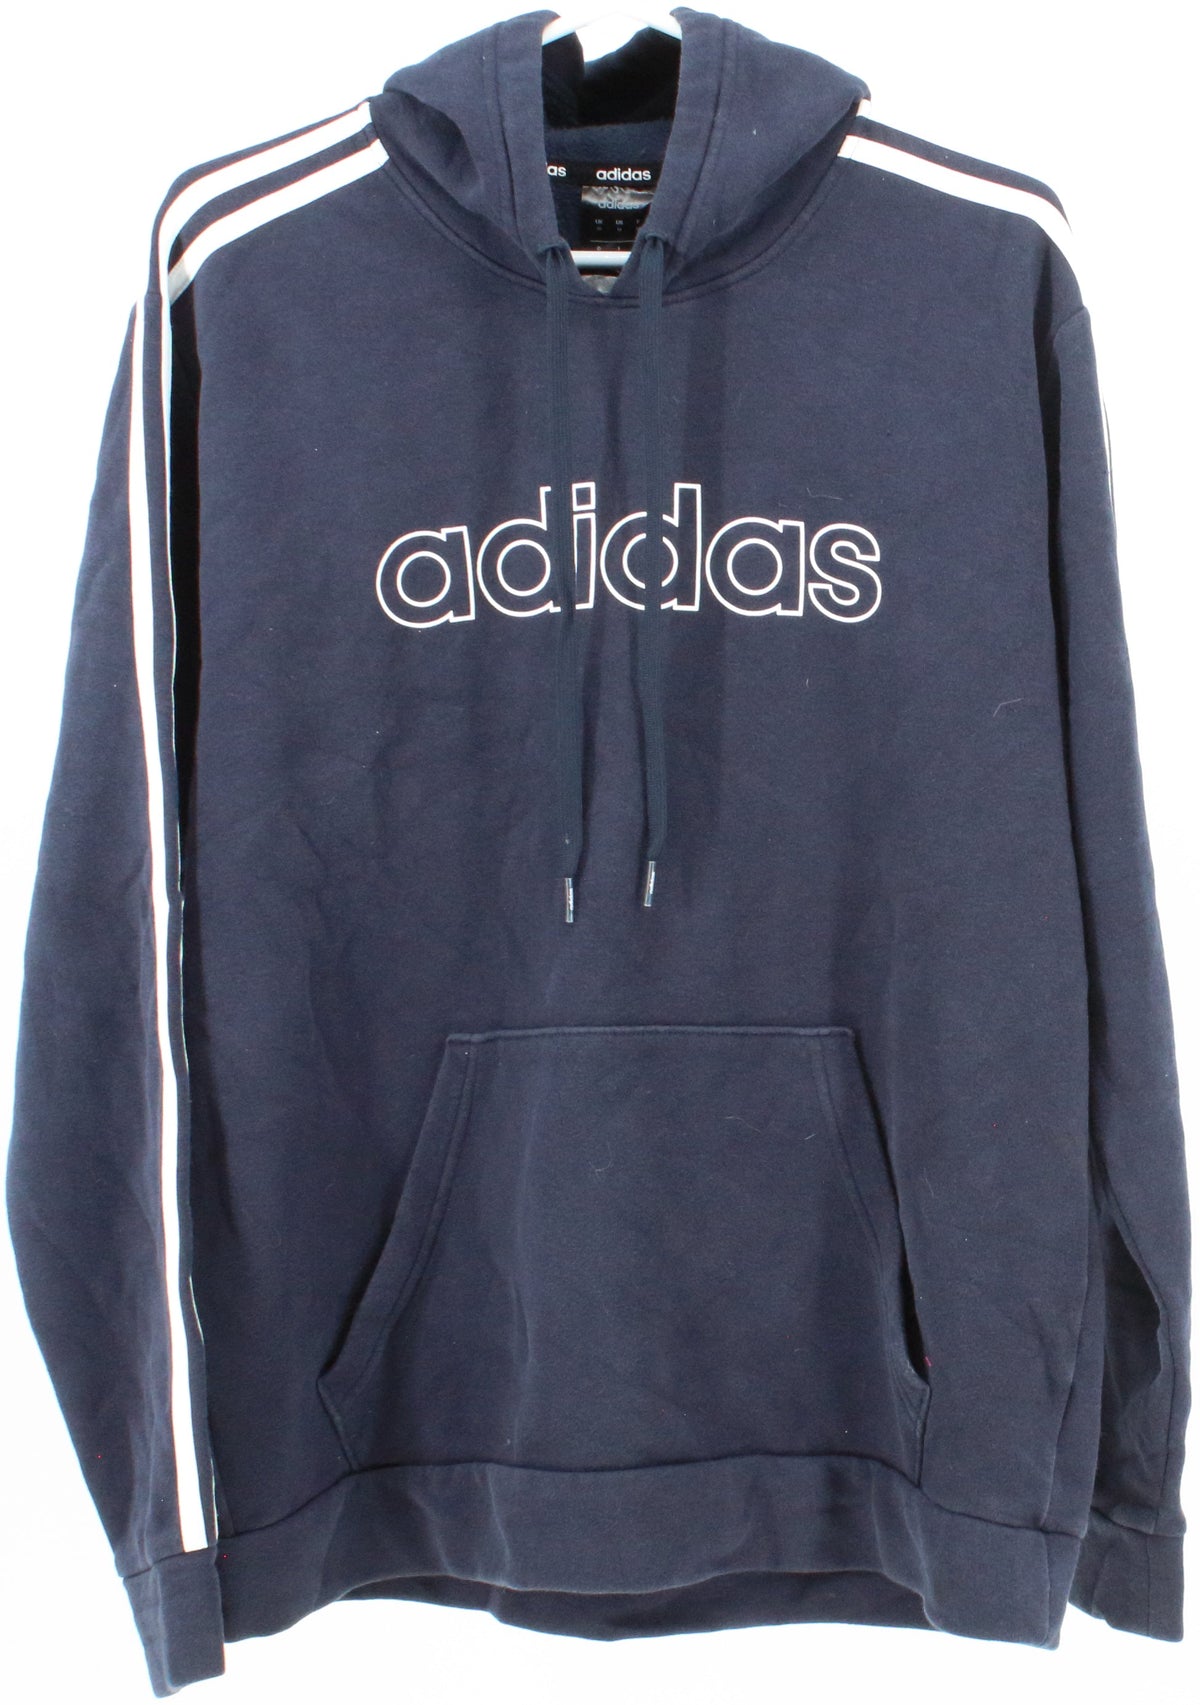 Adidas Navy Blue Hooded Sweatshirt With White Logo and Side Stripes